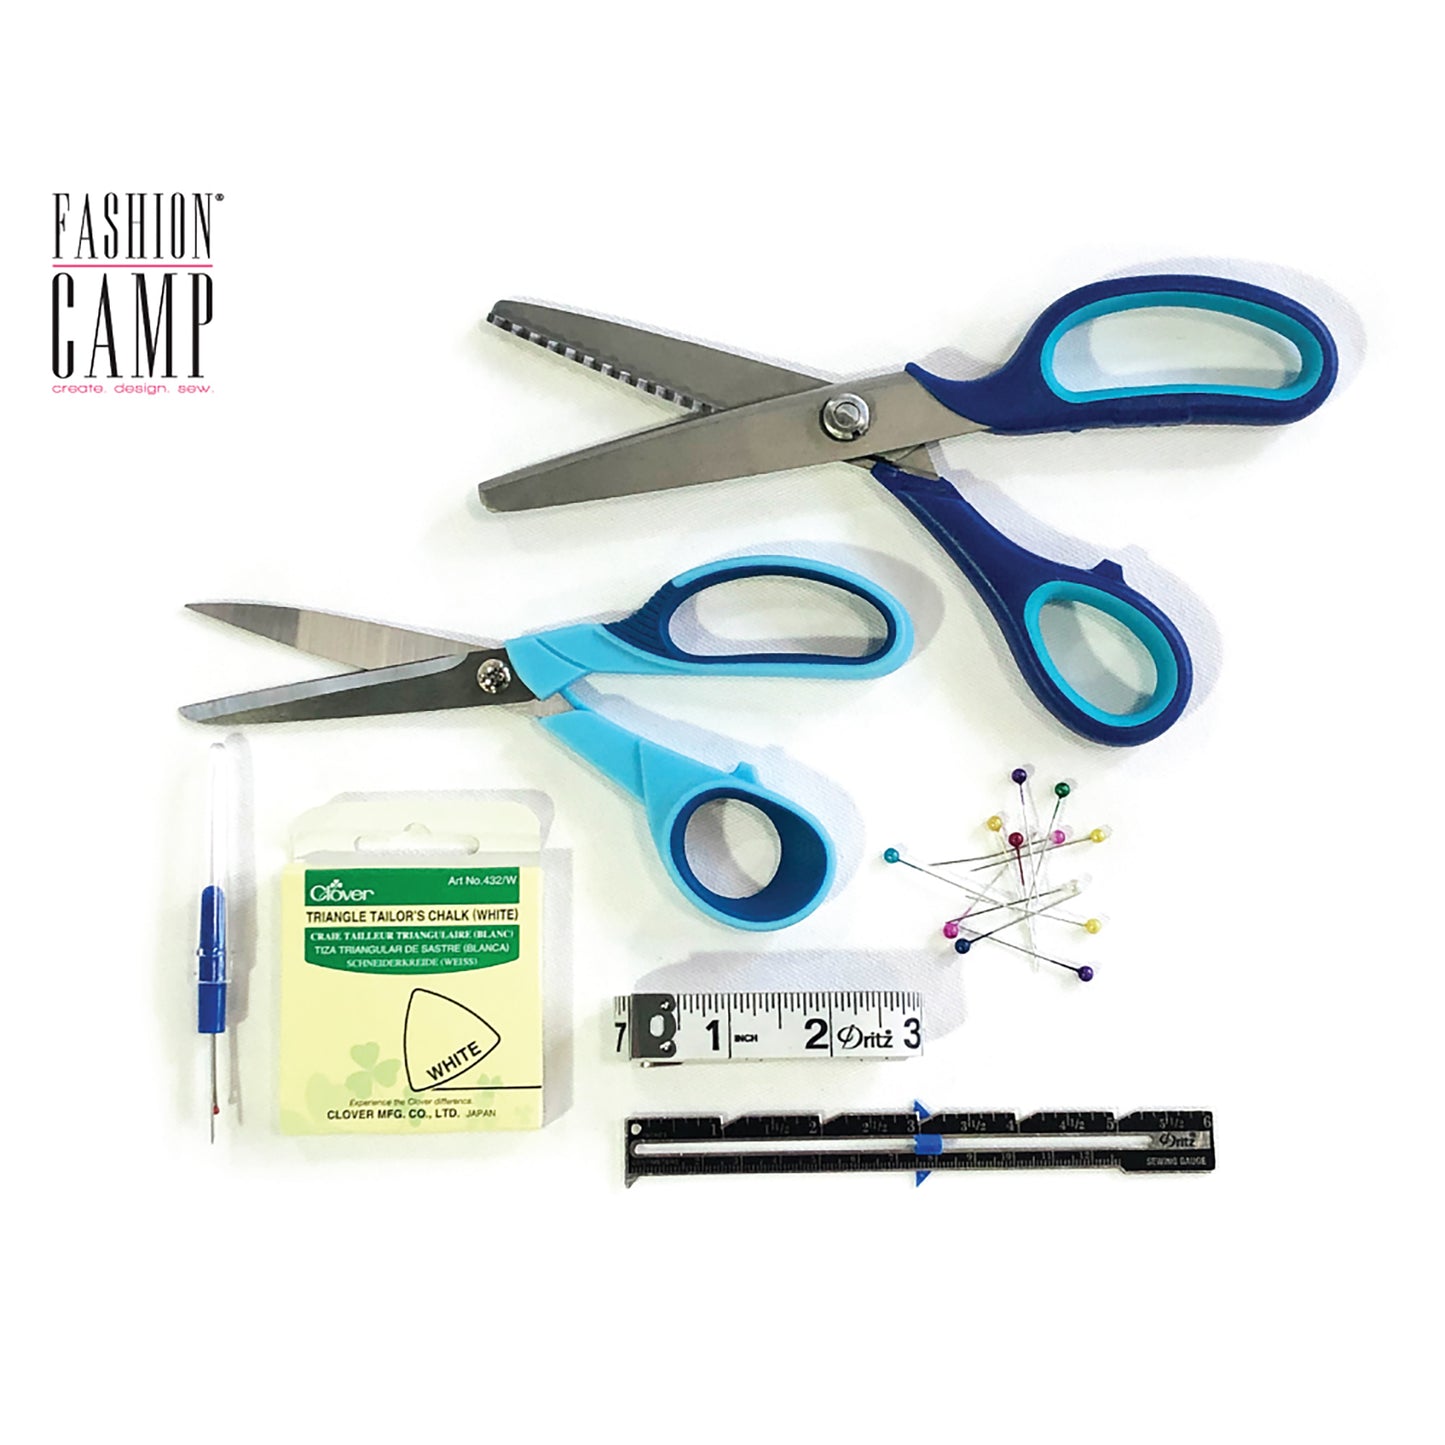 Sewing Supplies kit. Fabric shears, pinking shears, tailor's chalk, measuring tape, seam gauge, straight pins, and a seam ripper- all in a cute cloth bag! 